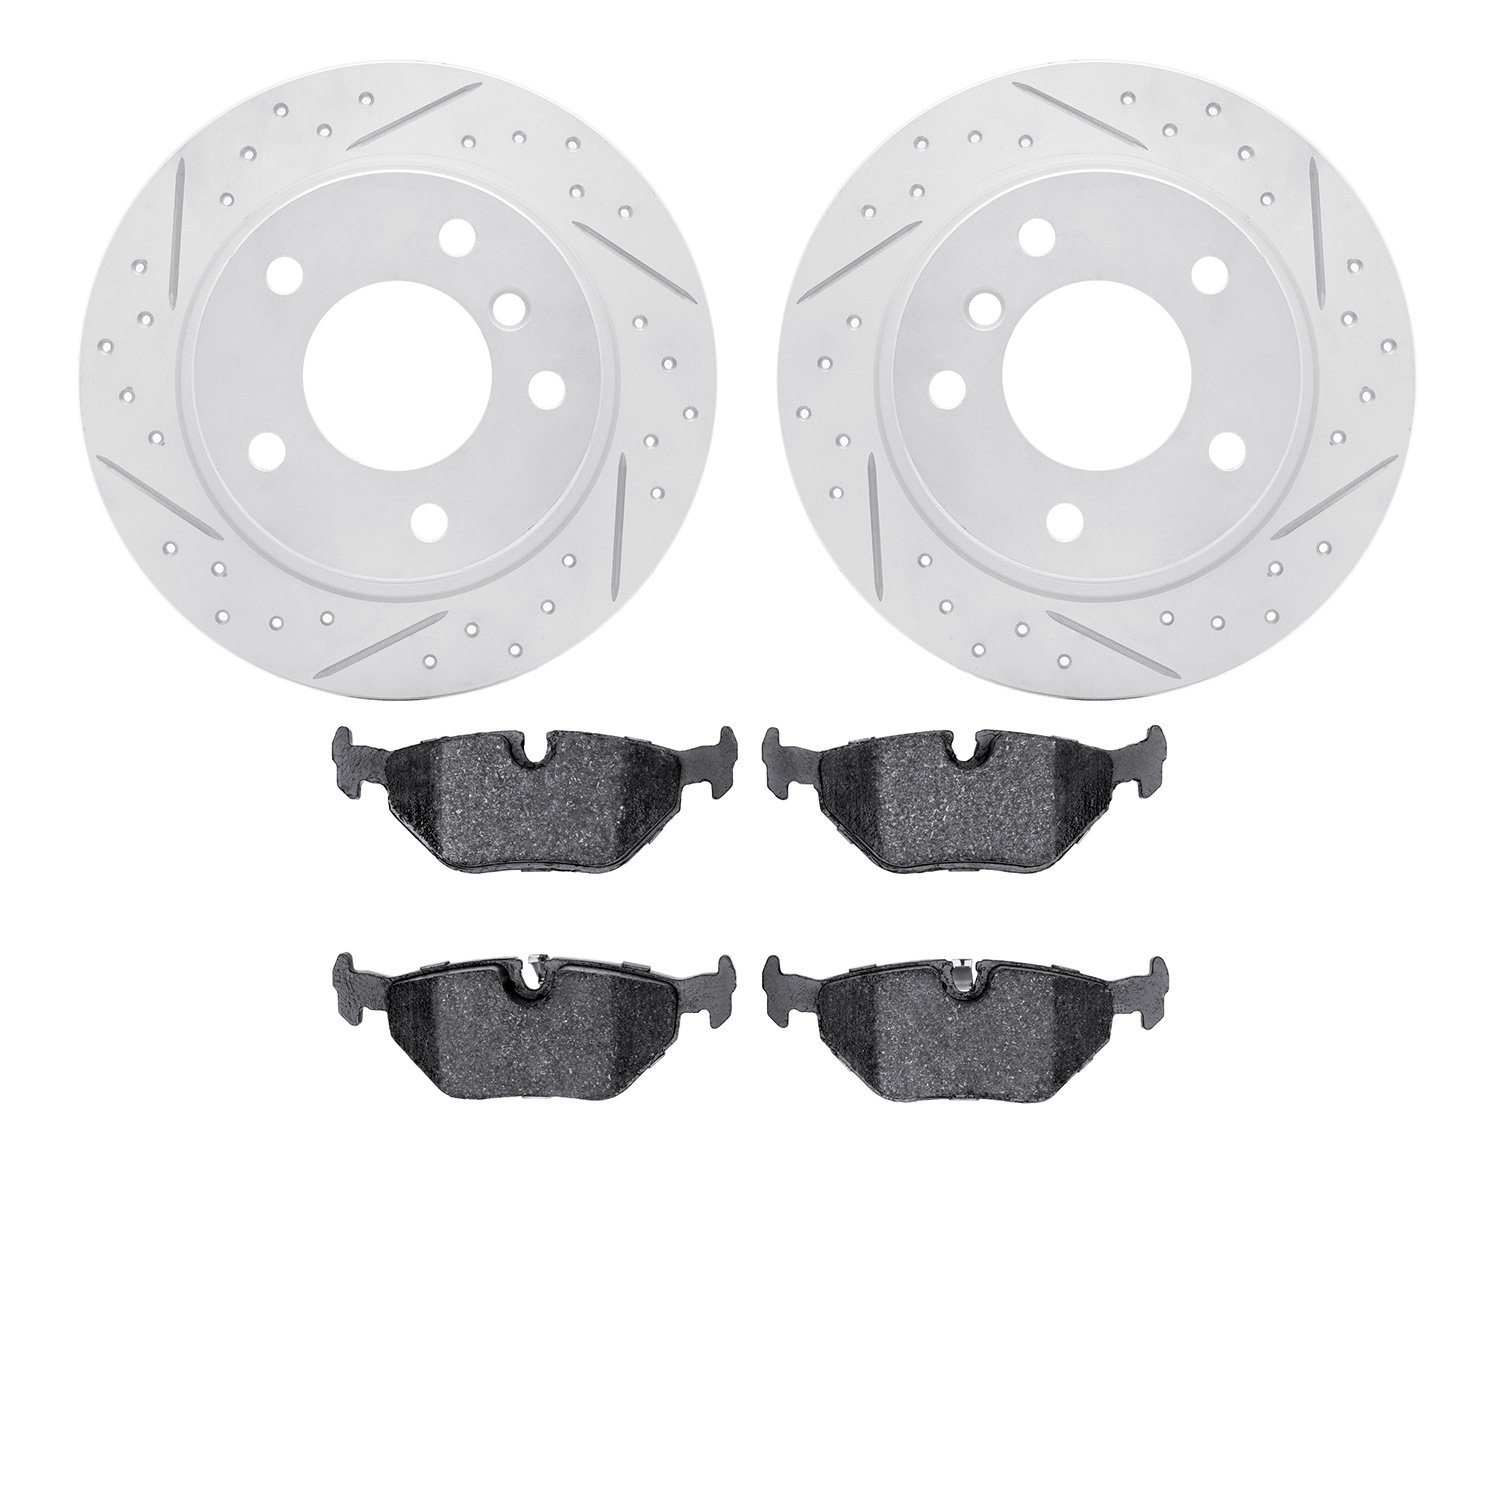 2502-31023 Geoperformance Drilled/Slotted Rotors w/5000 Advanced Brake Pads Kit, 1998-2002 BMW, Position: Rear